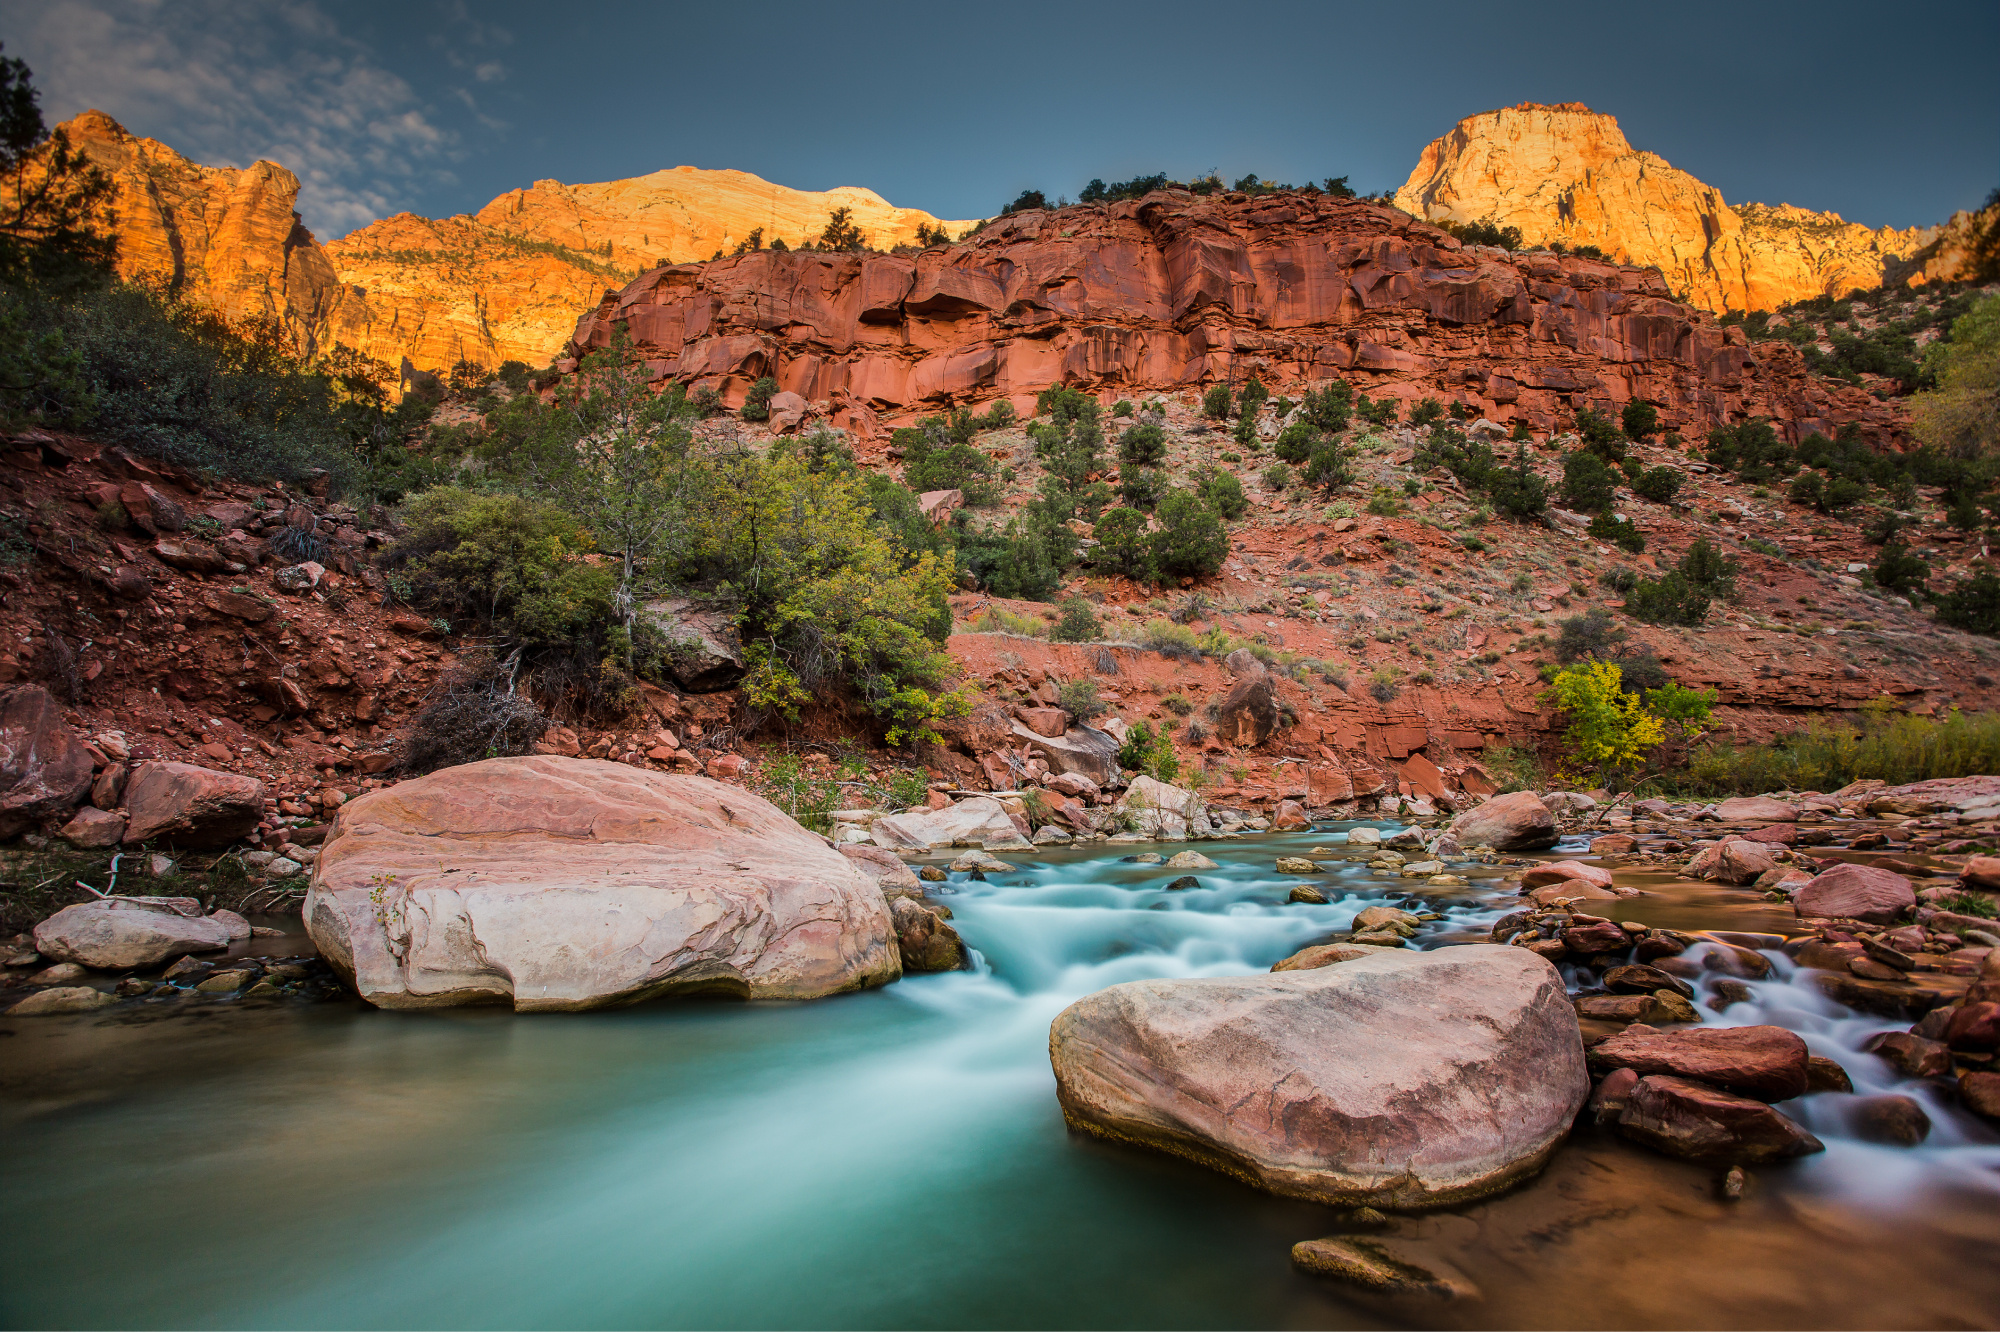 HDR Photography Workshop: Zion River HDR | Pt.7 | Final Image Processing